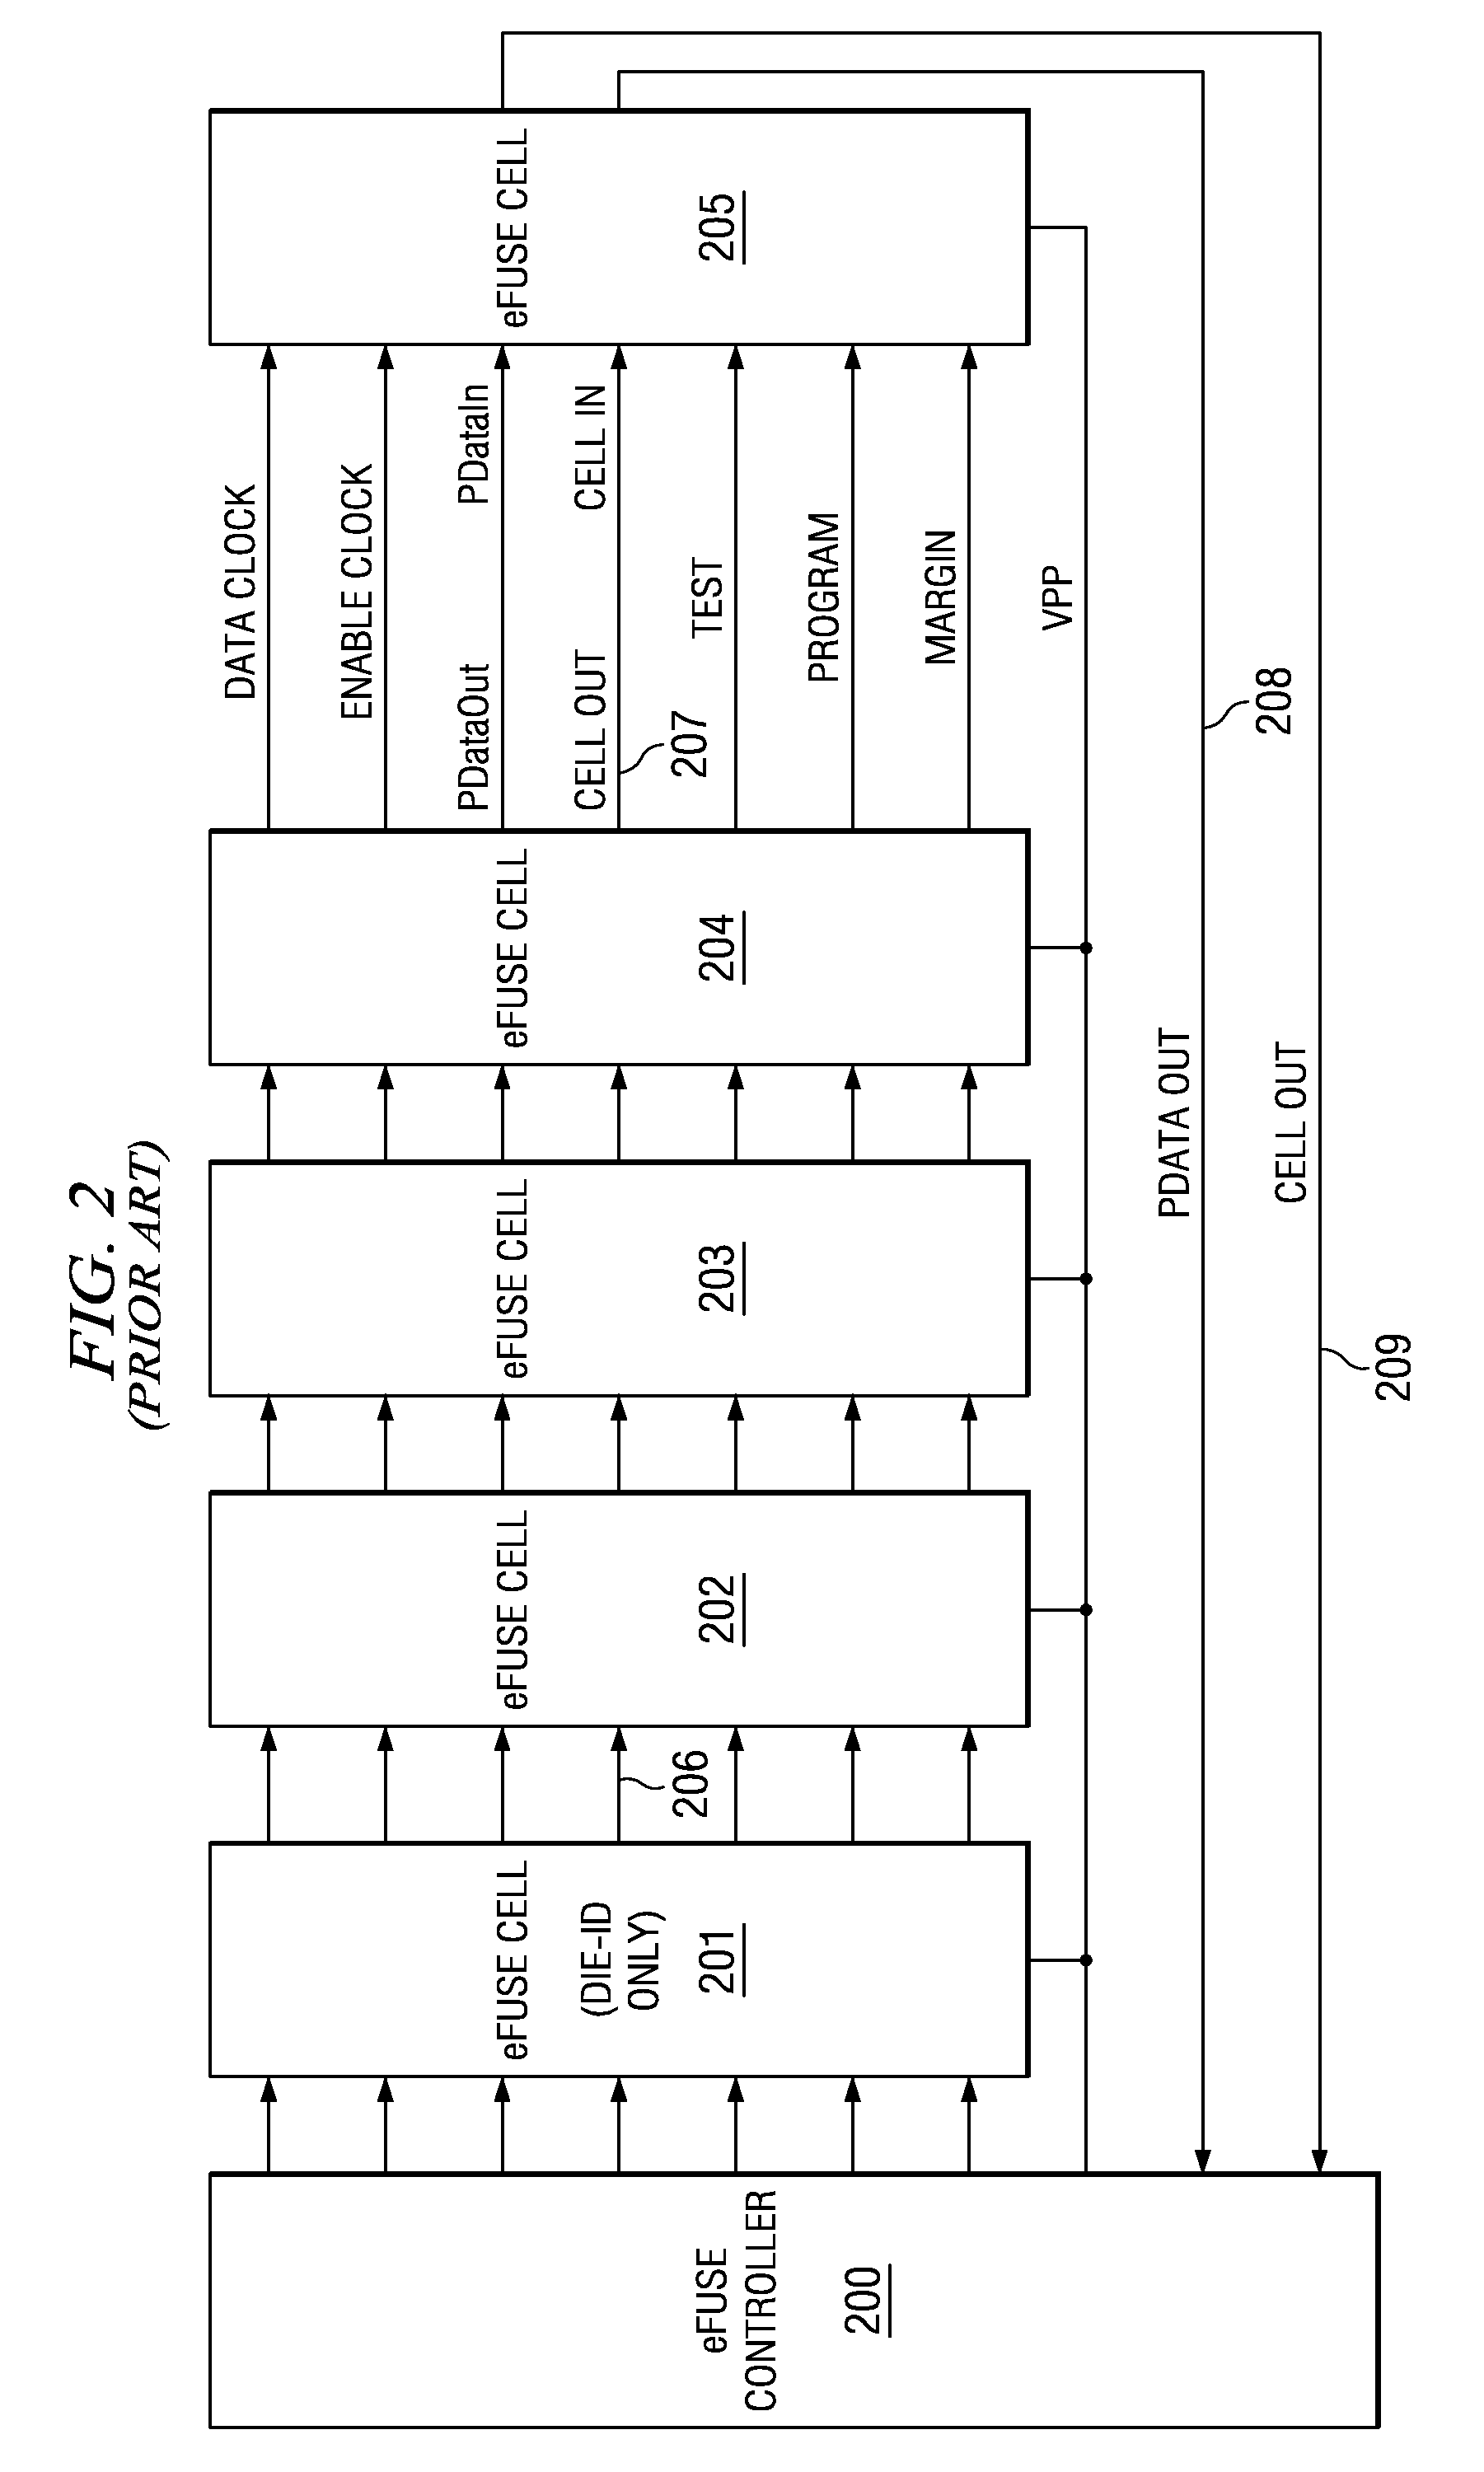 Process parameter based I/O timing programmability using electrical fuse elements